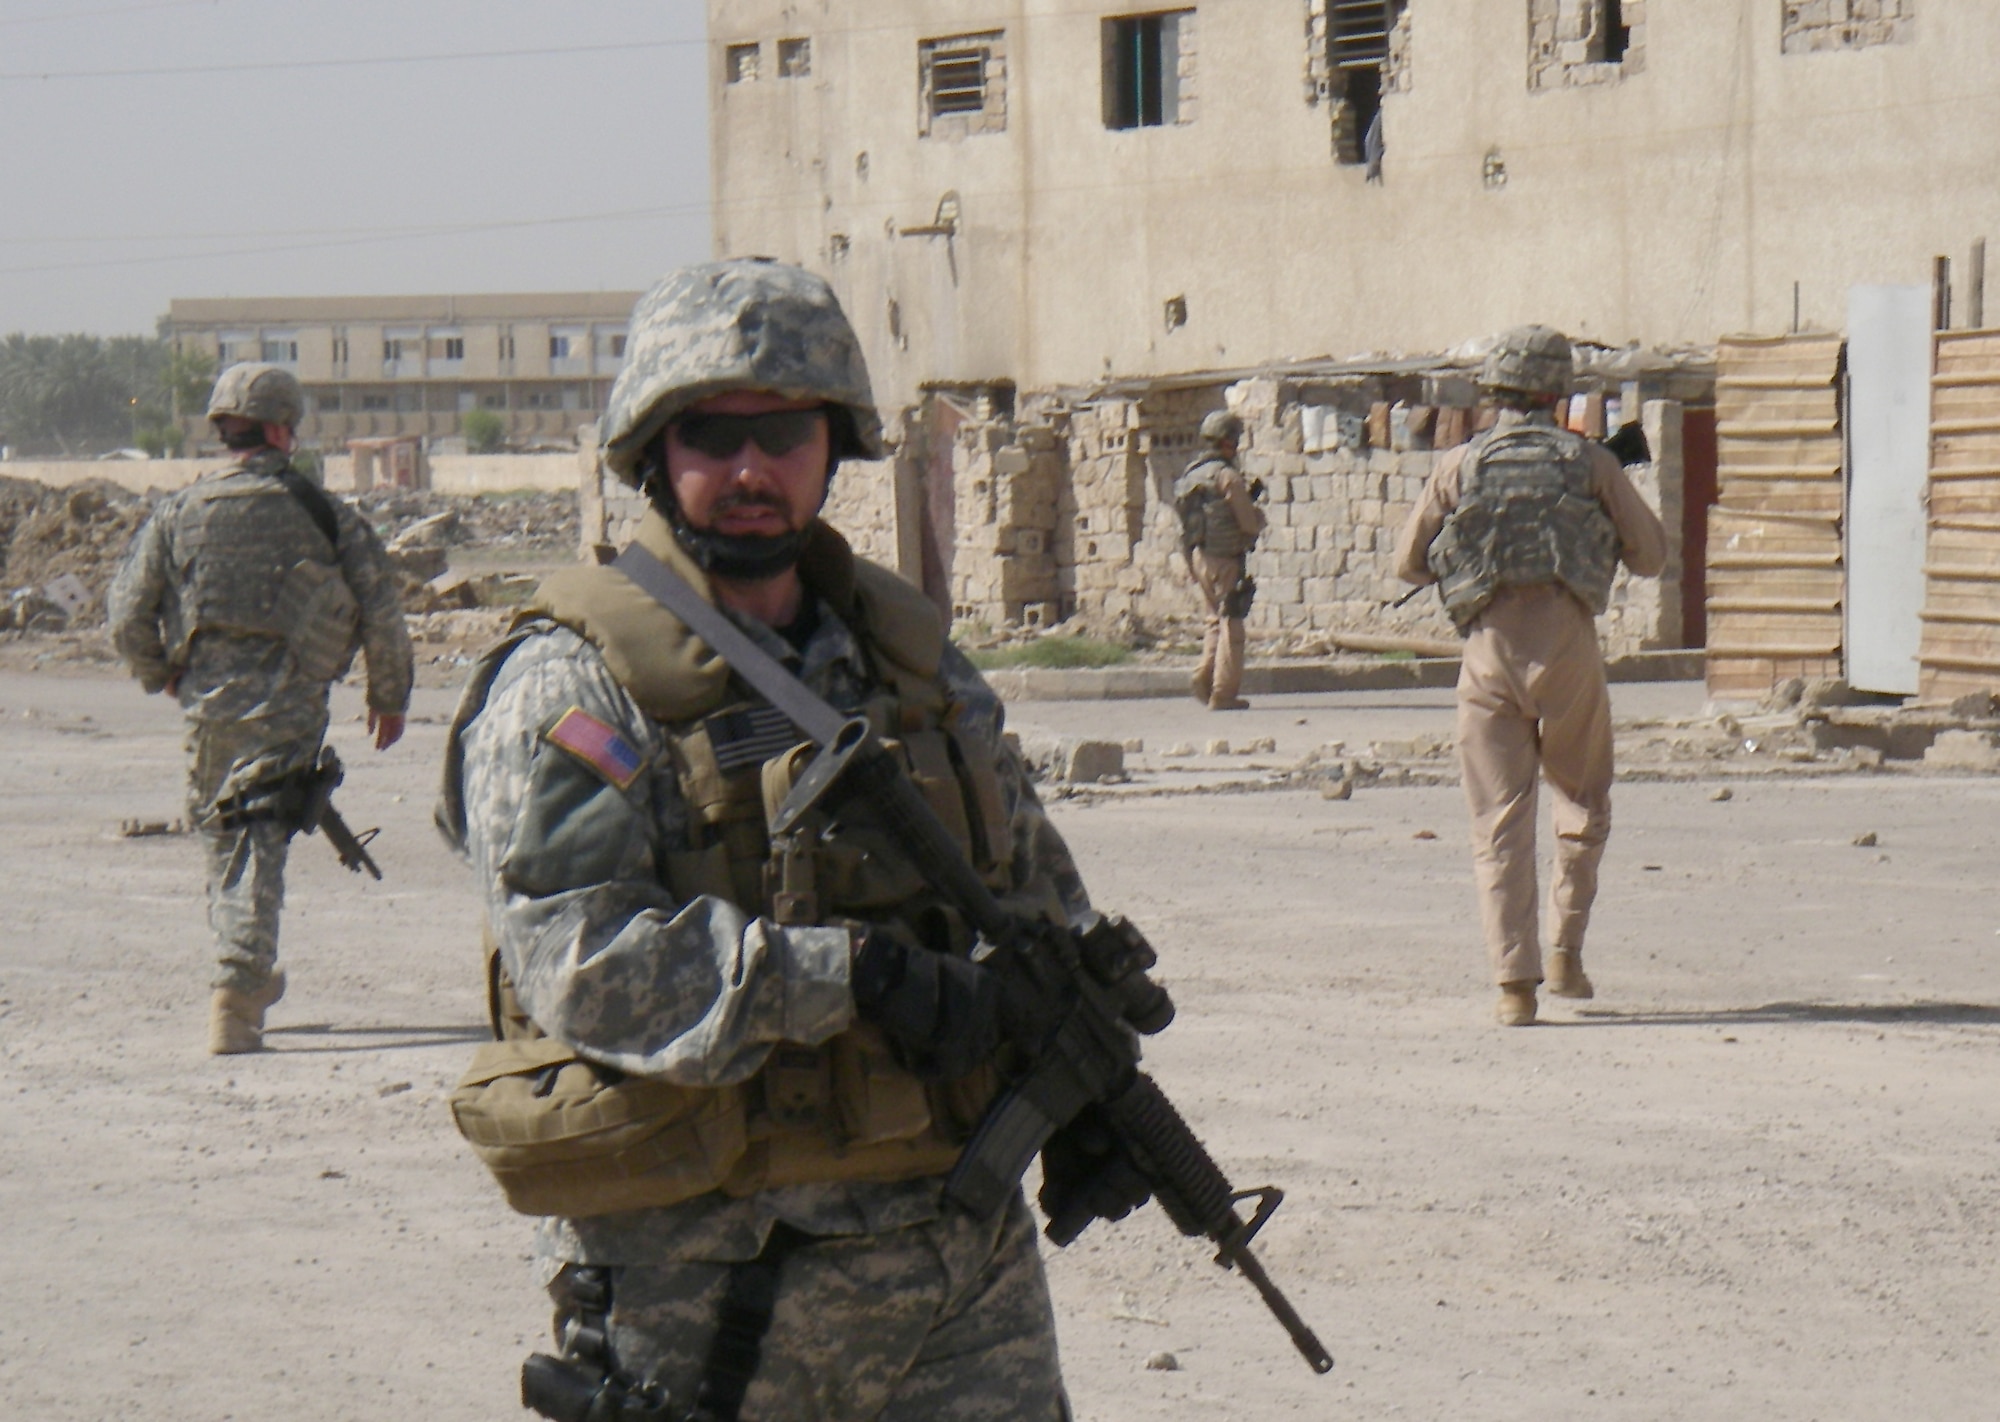 Air Force Office of Special Investigations Special Agent Terry Krebs on patrol in Baghdad. AFOSI agents listen carefully and watch for clues, gathering information that will help them zero in on the insurgents they seek. (U.S. Air Force photo)